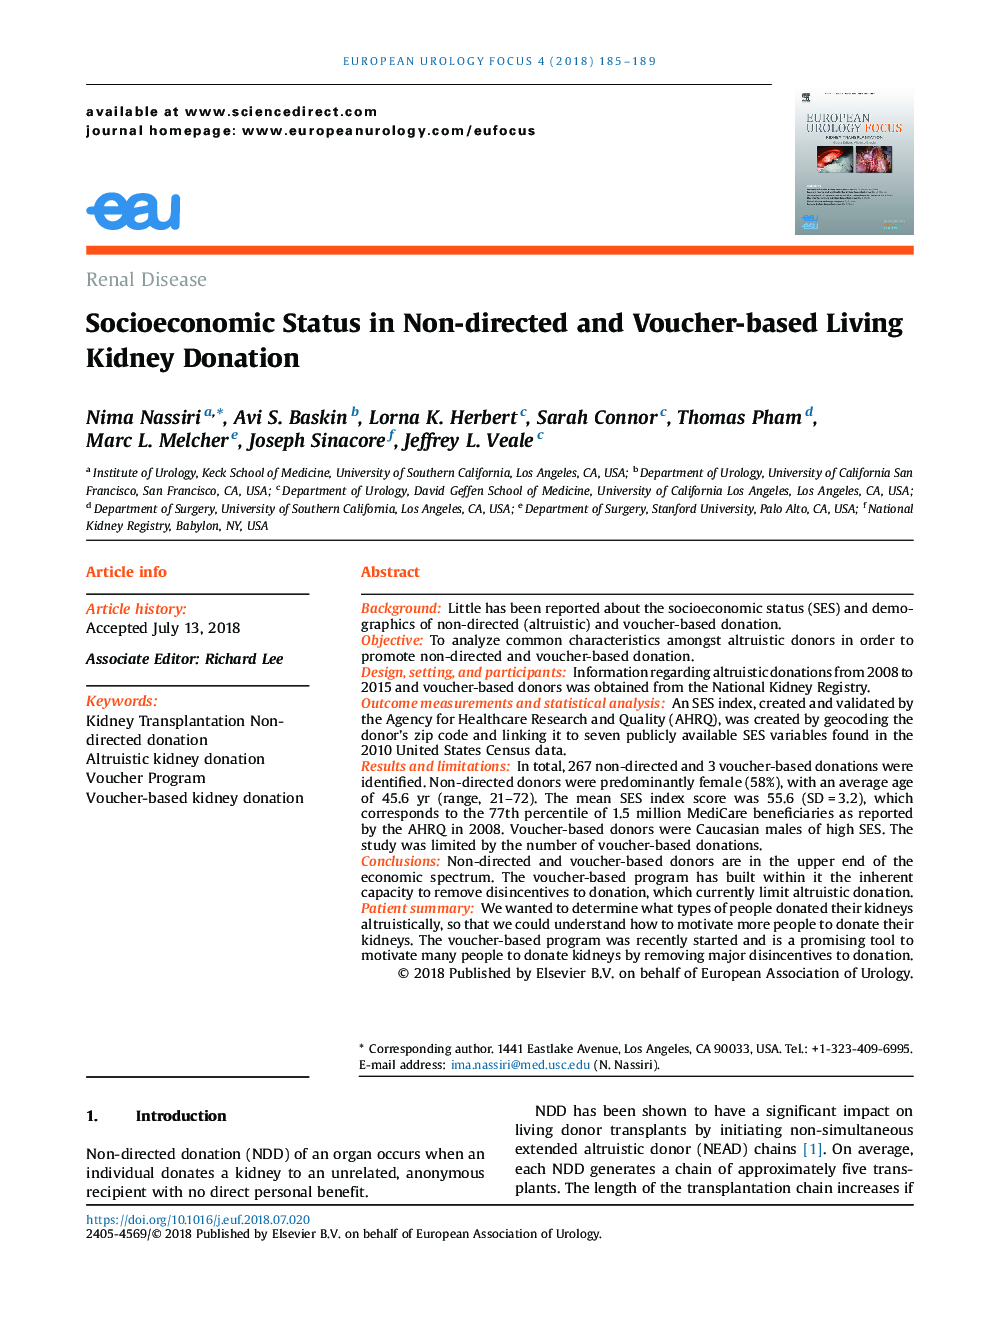 Socioeconomic Status in Non-directed and Voucher-based Living Kidney Donation